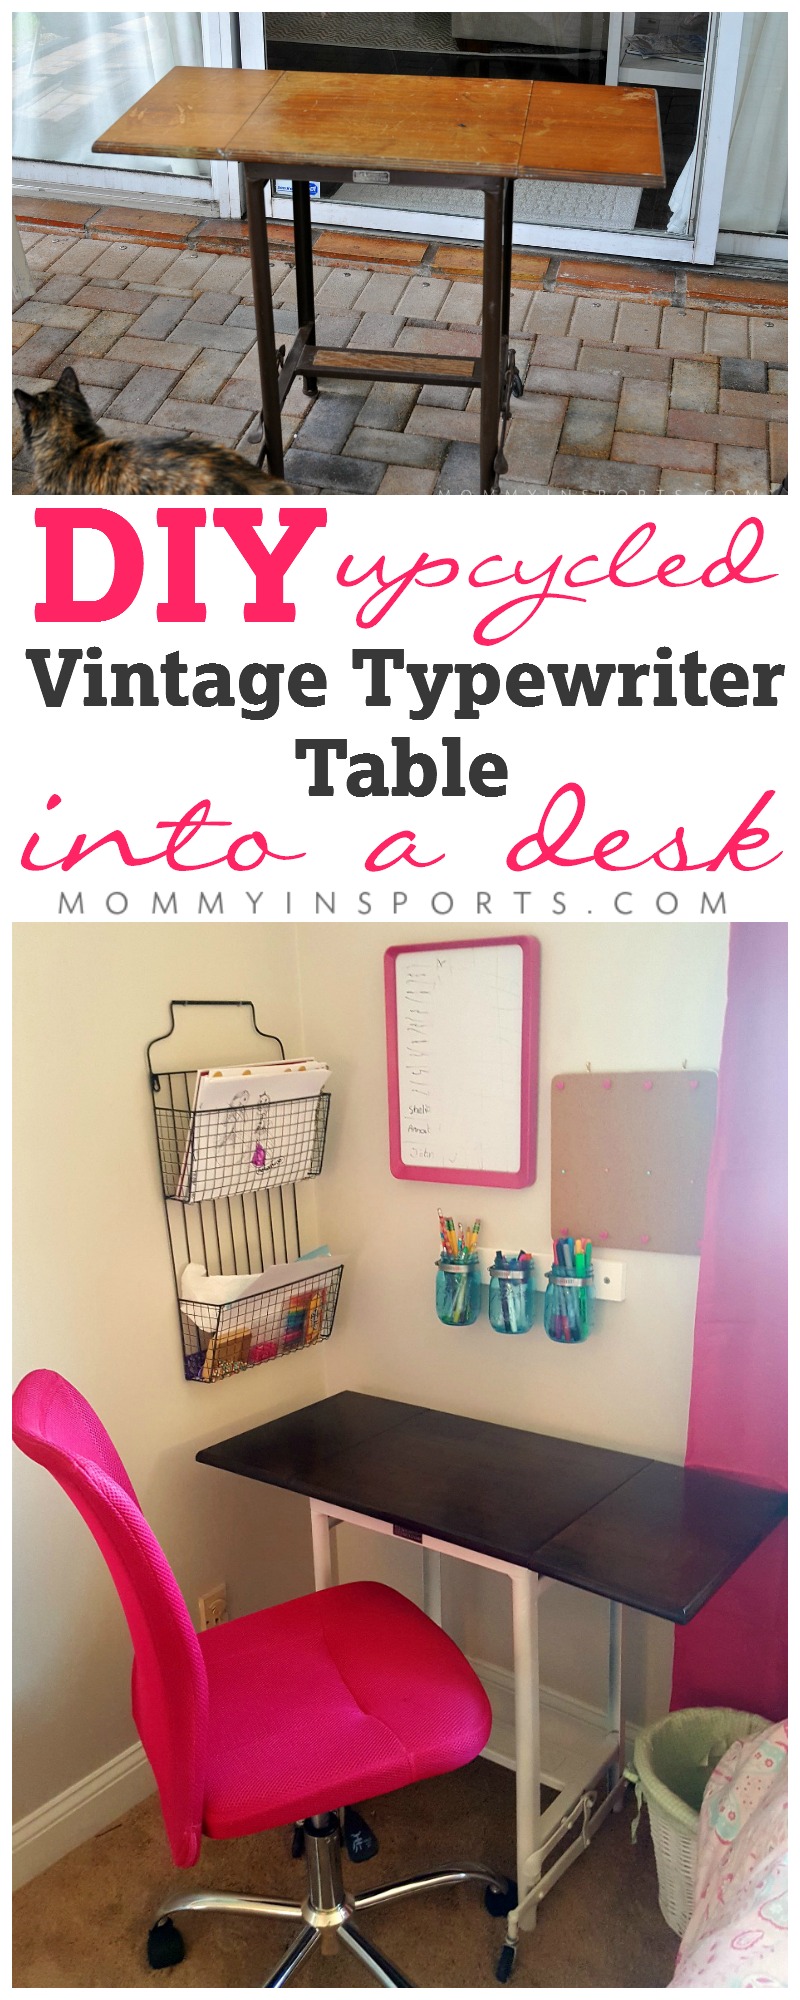 Upcycle a vintage typewriter table into a super cute kid's desk in an afternoon. Don't spend big bucks when you can make something old beautiful and new again! The perfect afternoon DIY project.